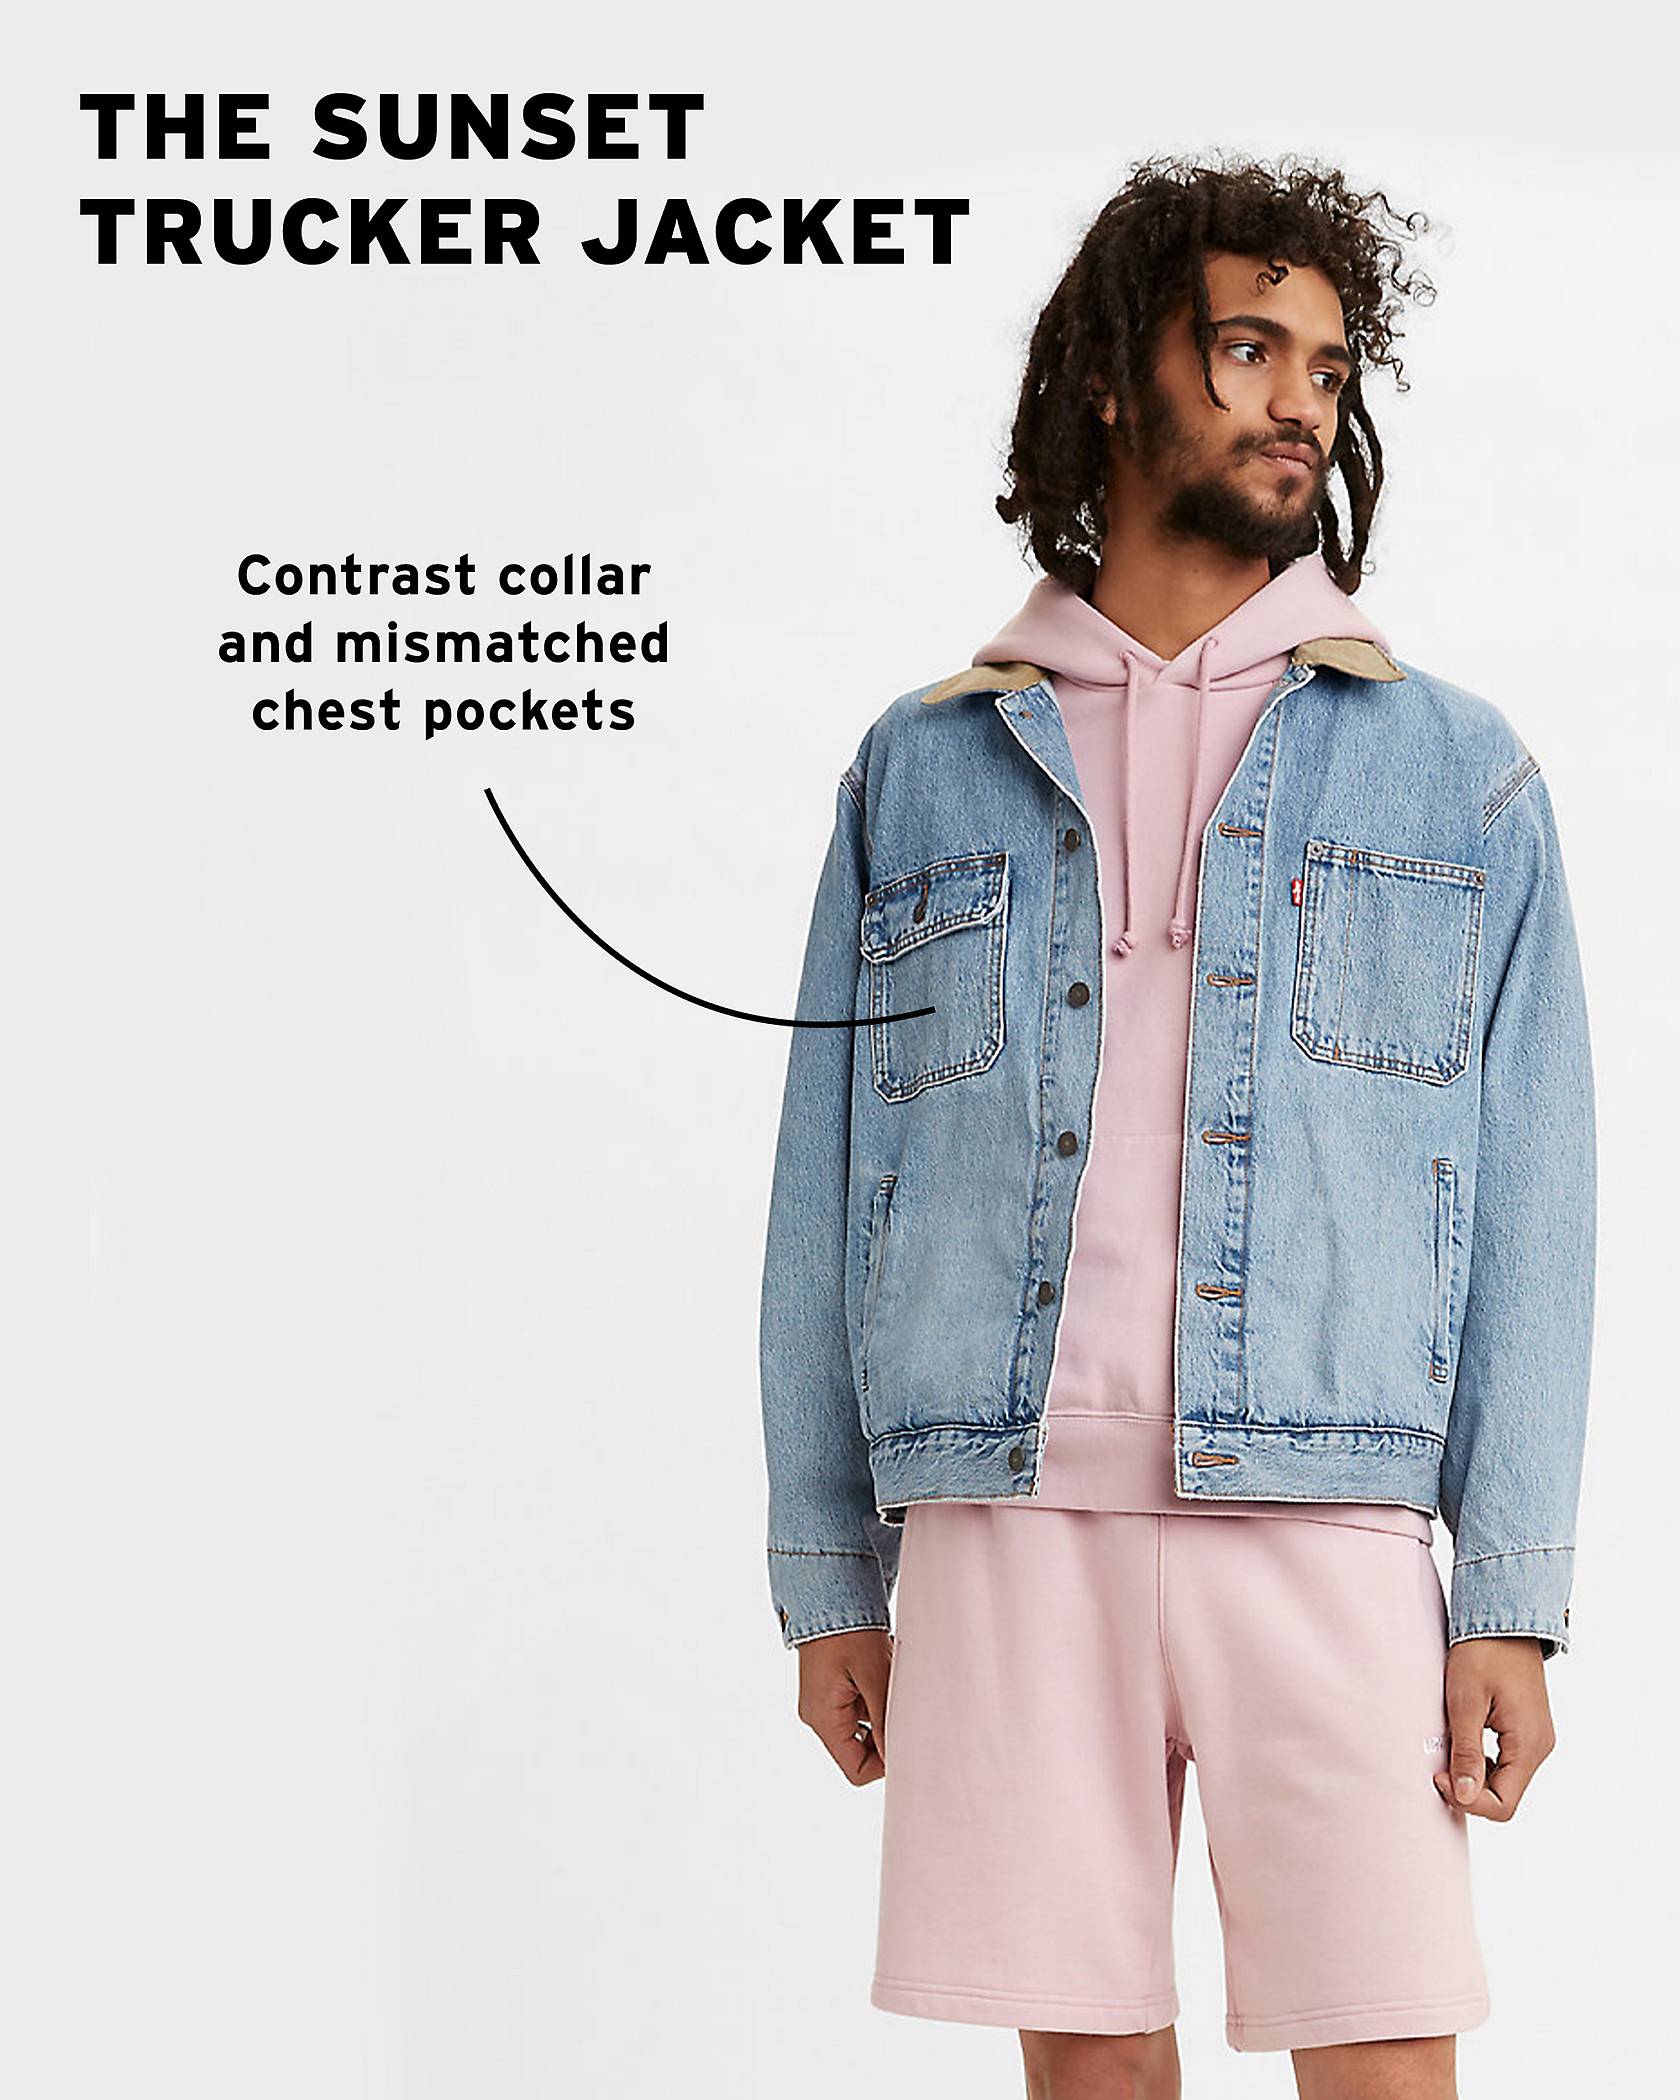 Model wearing Sunset Trucker jacket with copy: "Contrast collar and mismatched chest pockets"